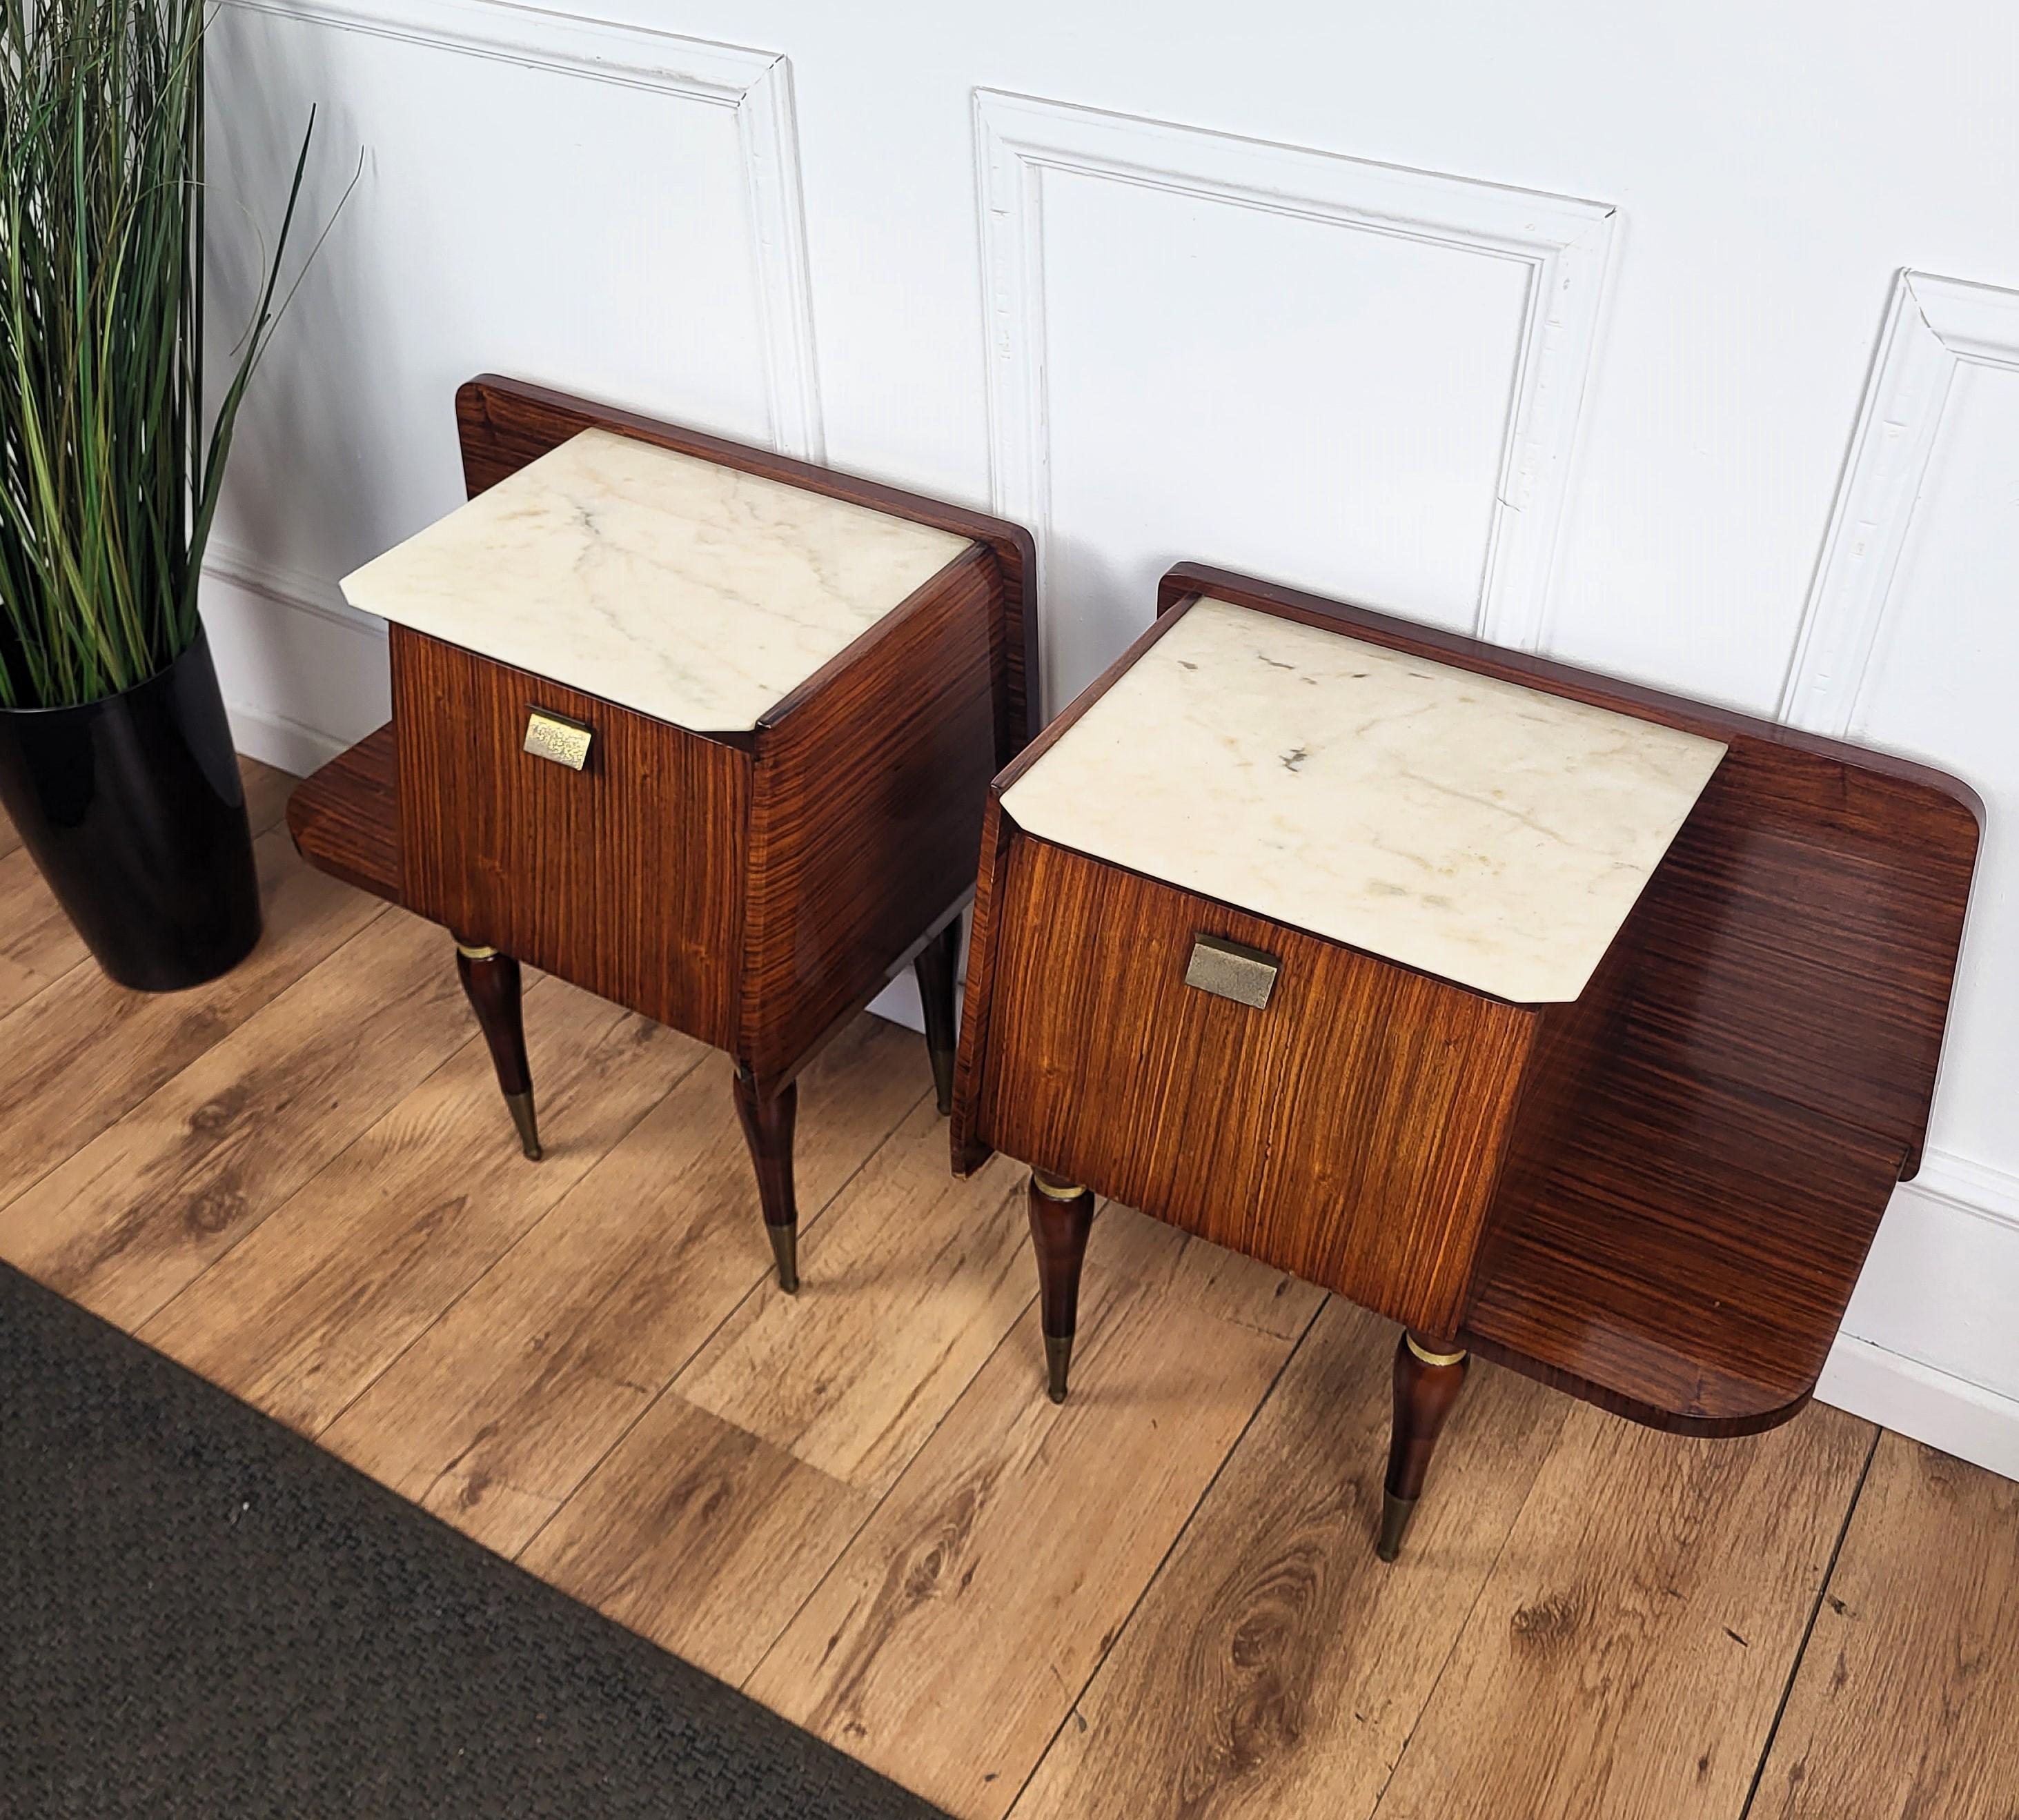 Brass Pair of Italian Mid-Century Modern Night Stands Bedside Tables Wood & Marble Top For Sale